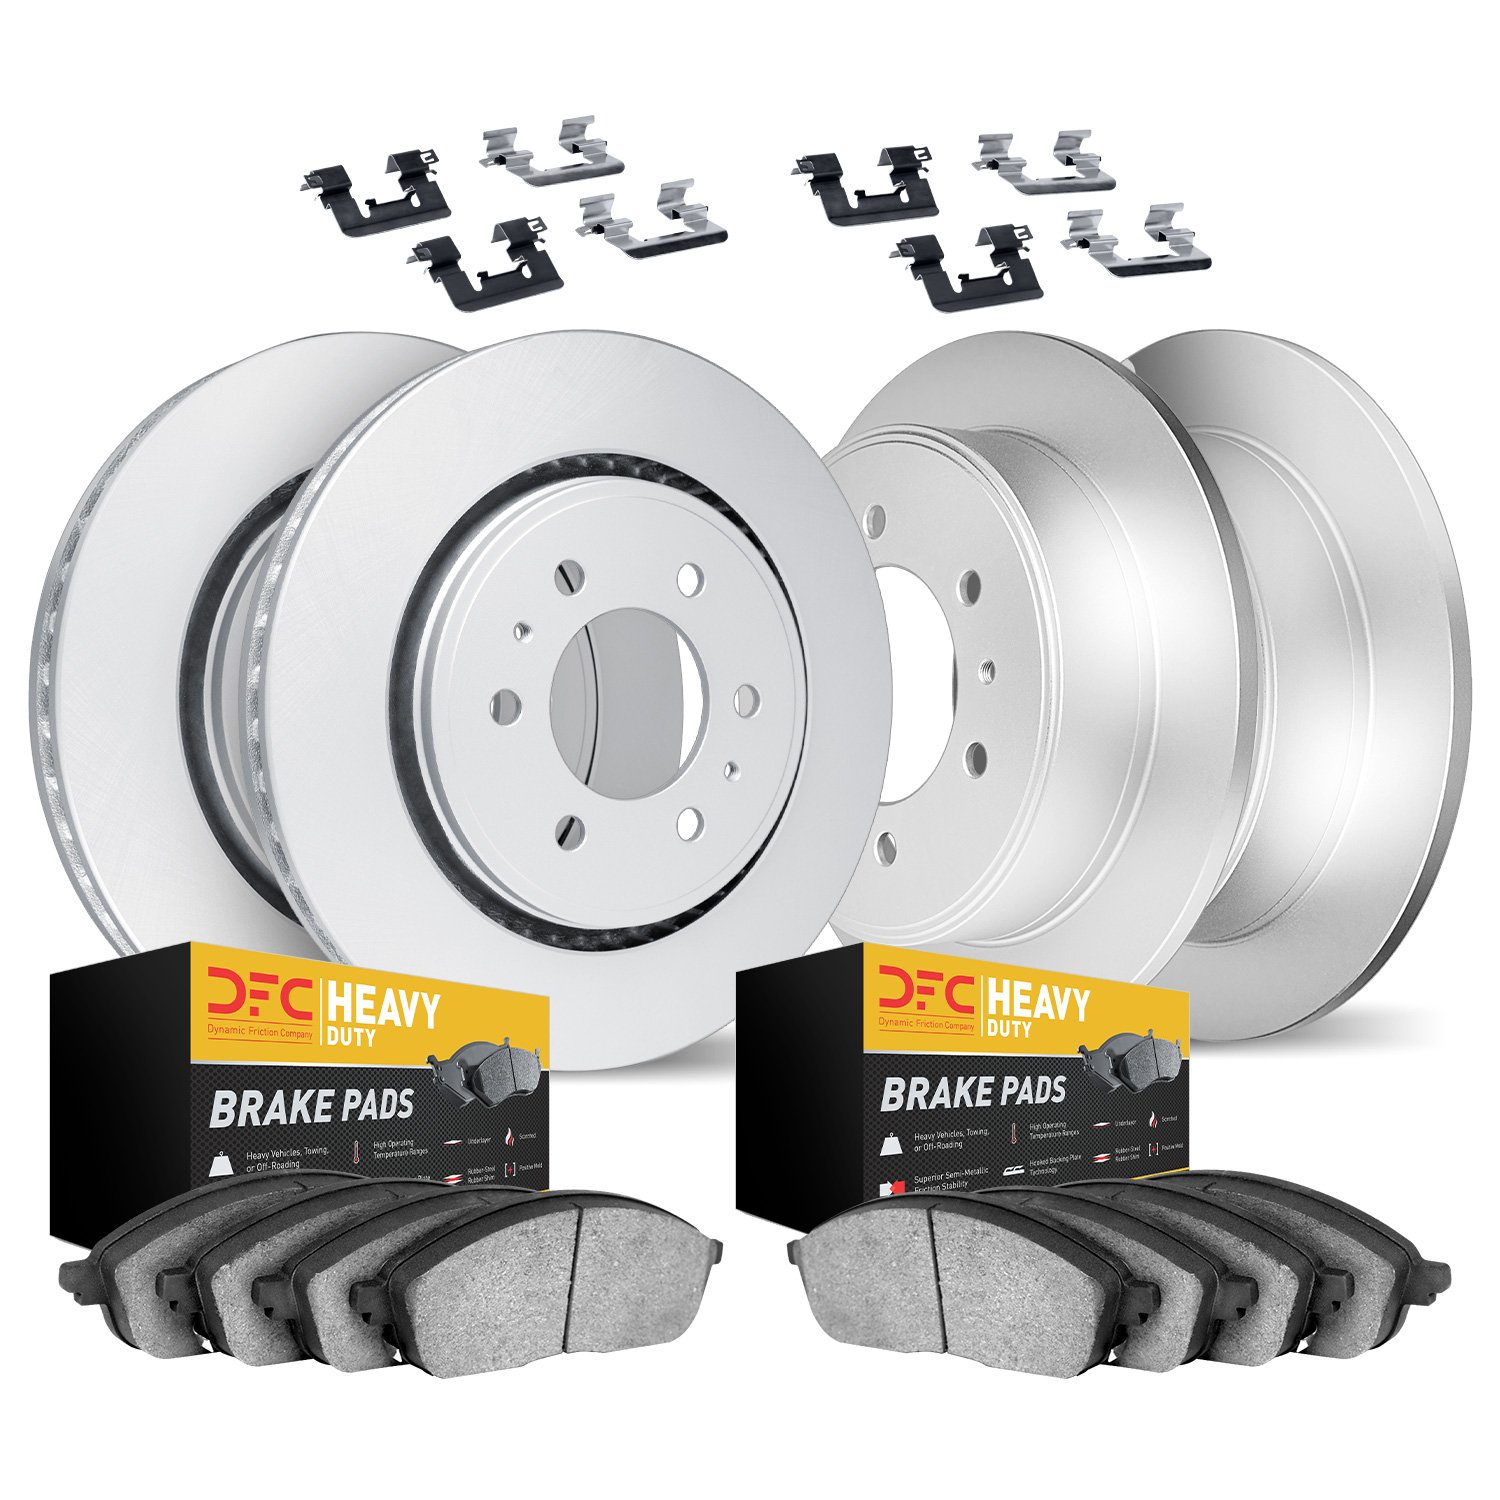 4214-40091 Geospec Brake Rotors w/Heavy-Duty Brake Pads & Hardware, Fits Select Multiple Makes/Models, Position: Front and Rear